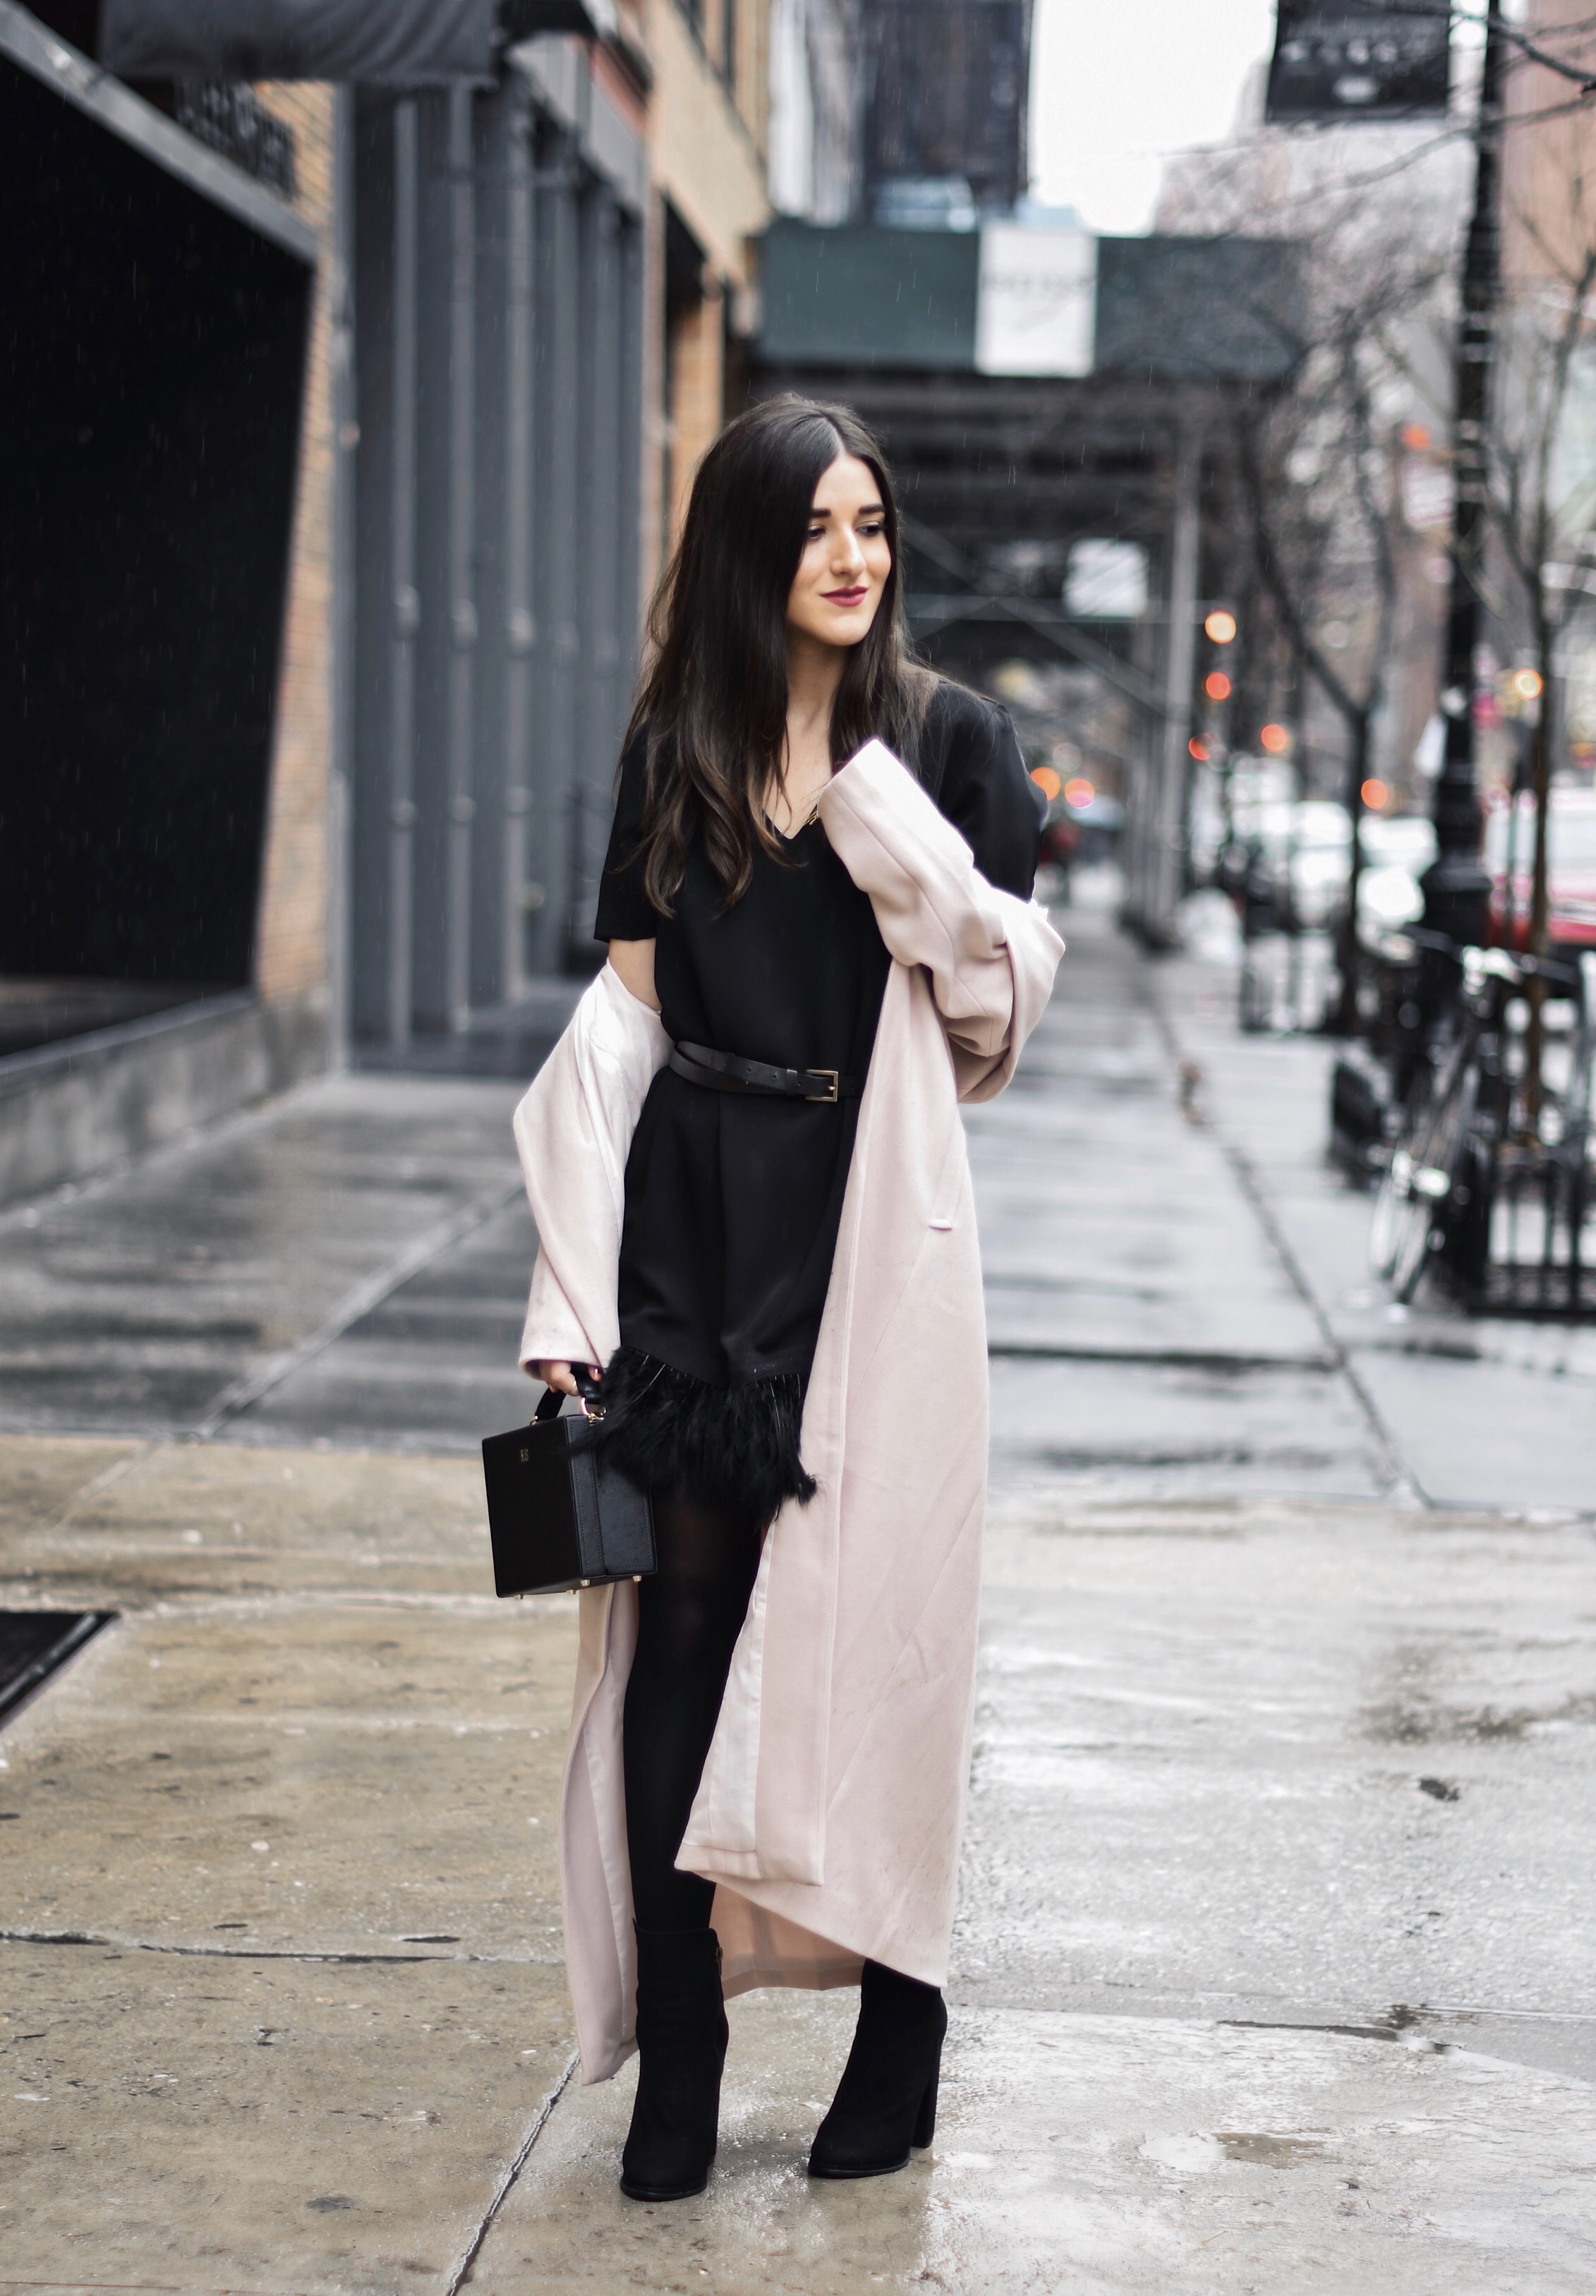 How To Stay Grounded Black Feather Trim Dress Long Pink Coat Esther Santer Fashion Blog NYC Street Style Blogger Outfit OOTD Trendy Saks Off 5th Feather Trim Dress Black Tights Booties M4D3 Shoes ASOS Belt Blush Box Clutch Bag Shop Wear Cozy  Winter.jpg